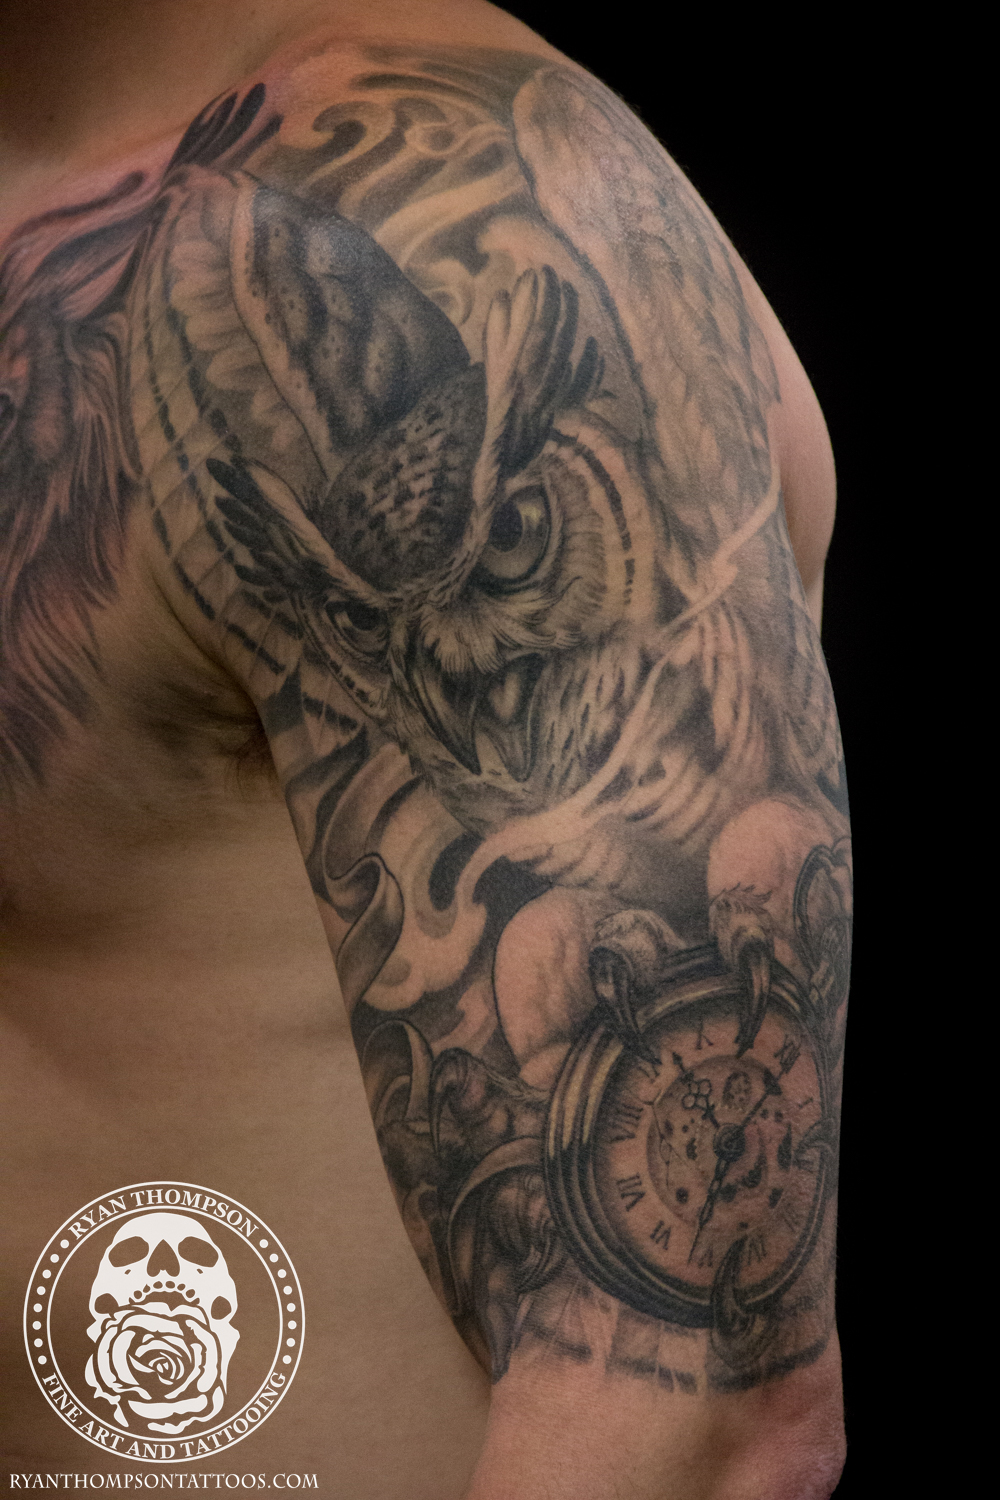 Rich's Owl and Lion Half-Sleeve